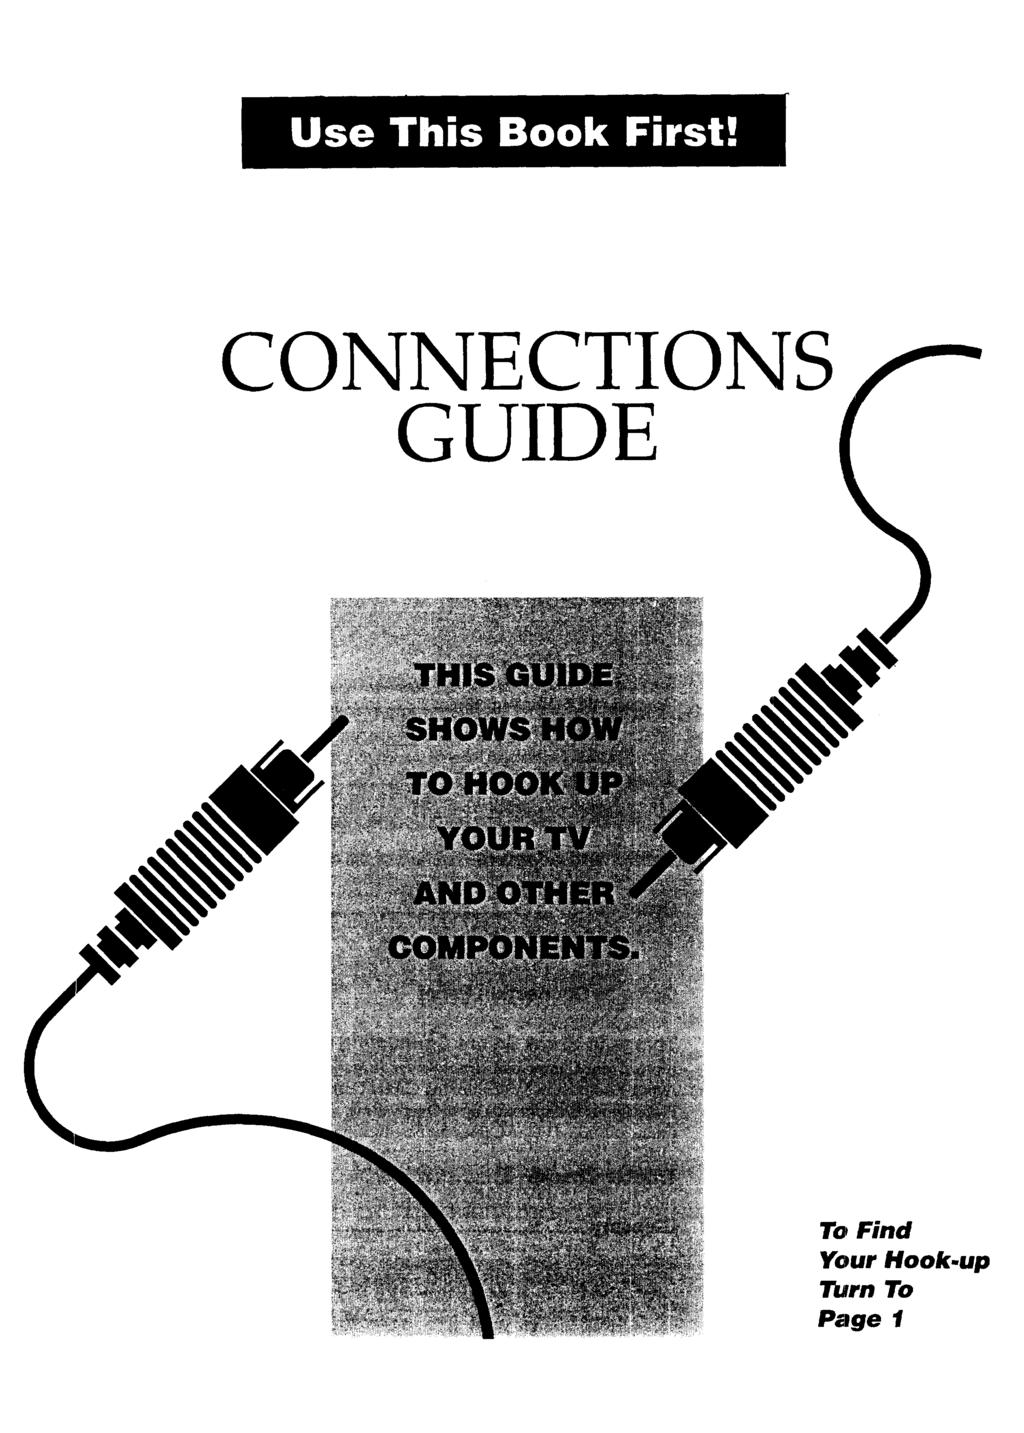 CONNECTIONS GUIDE To Fnd